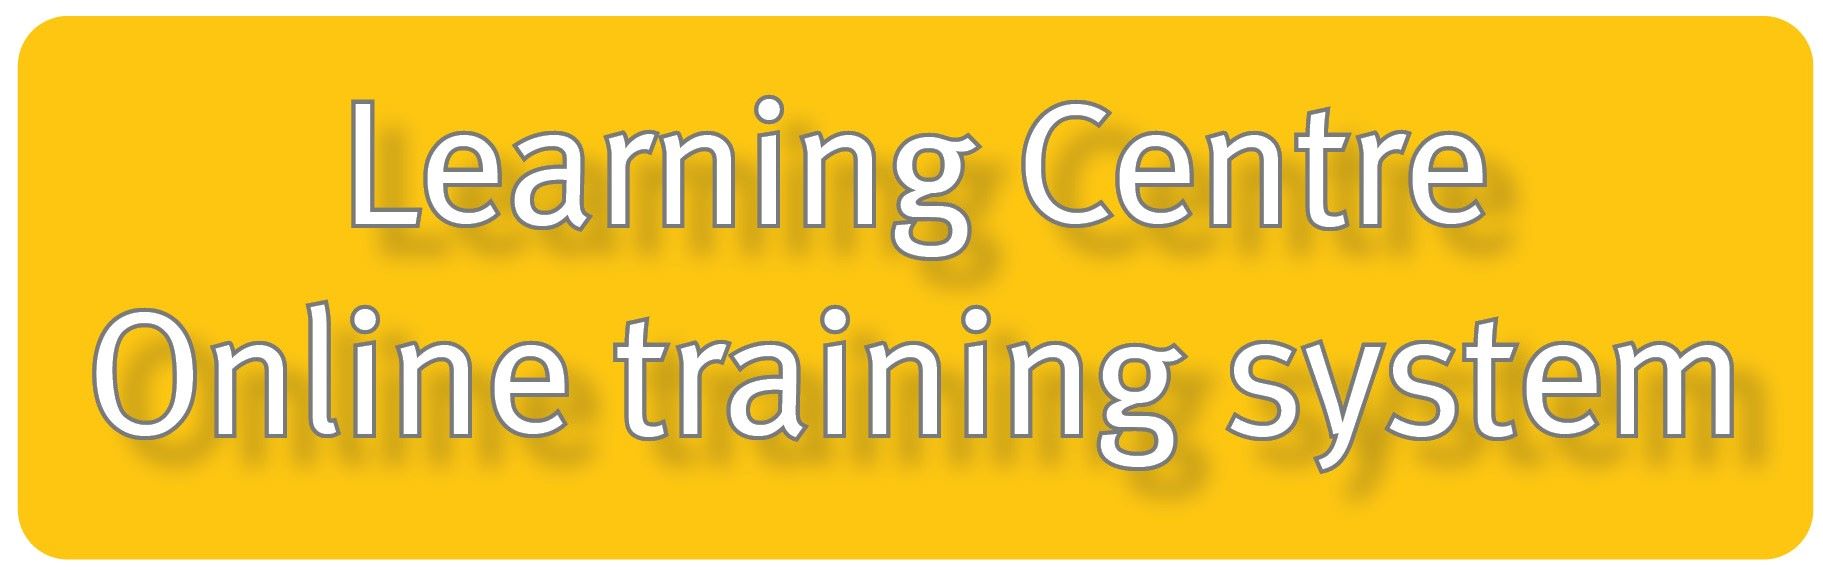 learning centre online training system